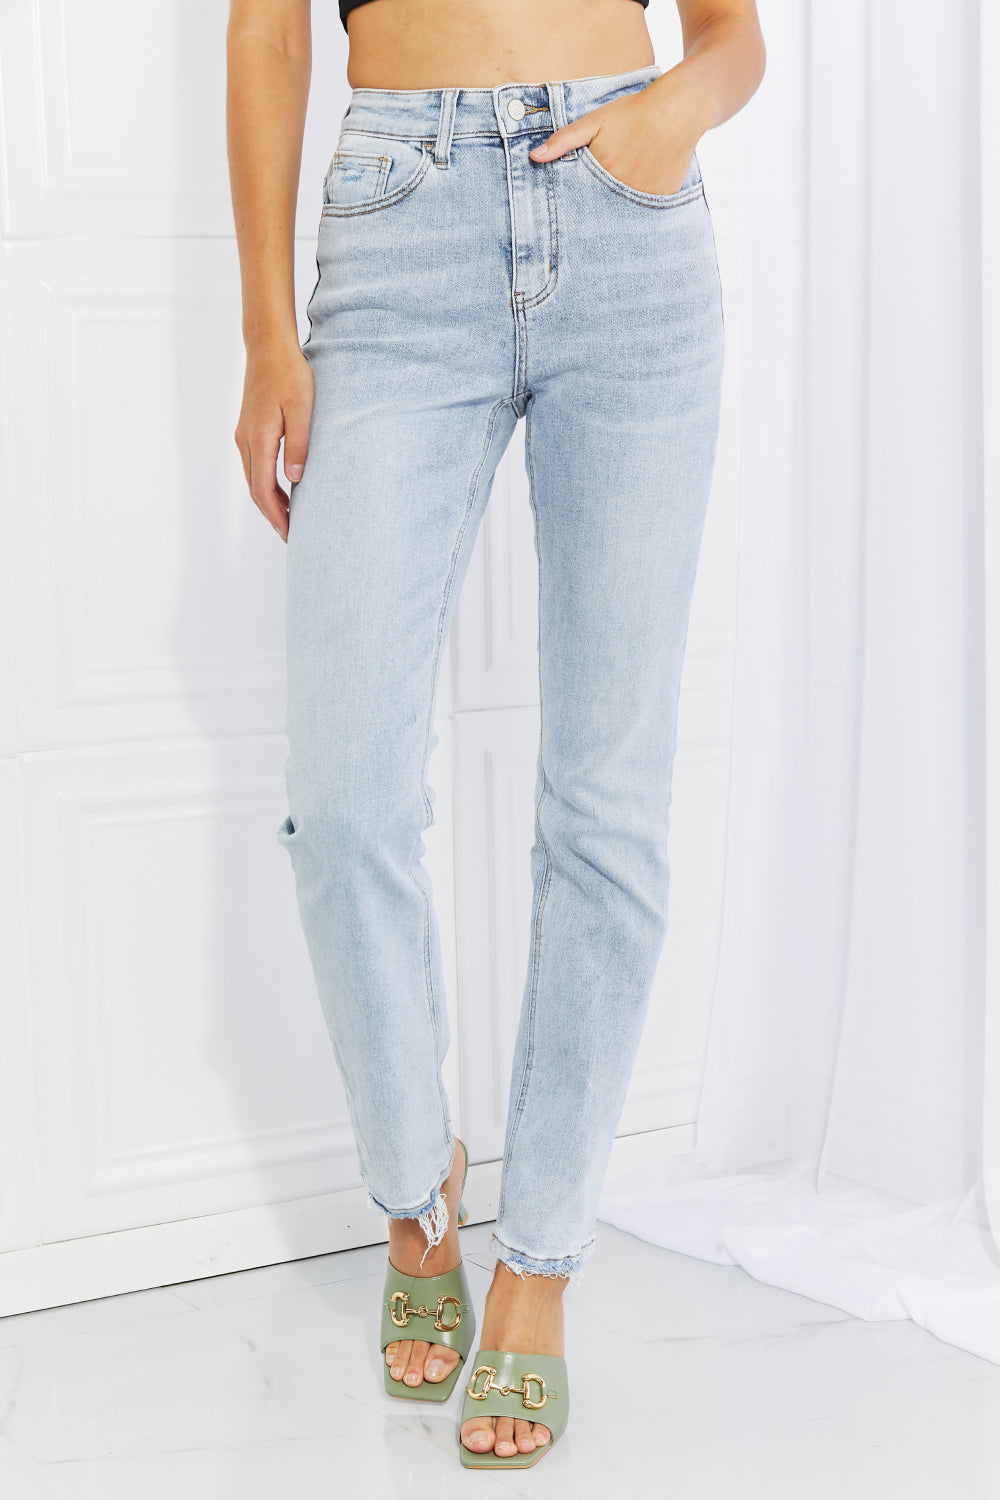 Lovervet Raw Hem High-Waisted Jeans-The Bee Chic Boutique-[option4]-[option5]-[option6]-[option7]-[option8]-Shop-Boutique-Clothing-for-Women-Online